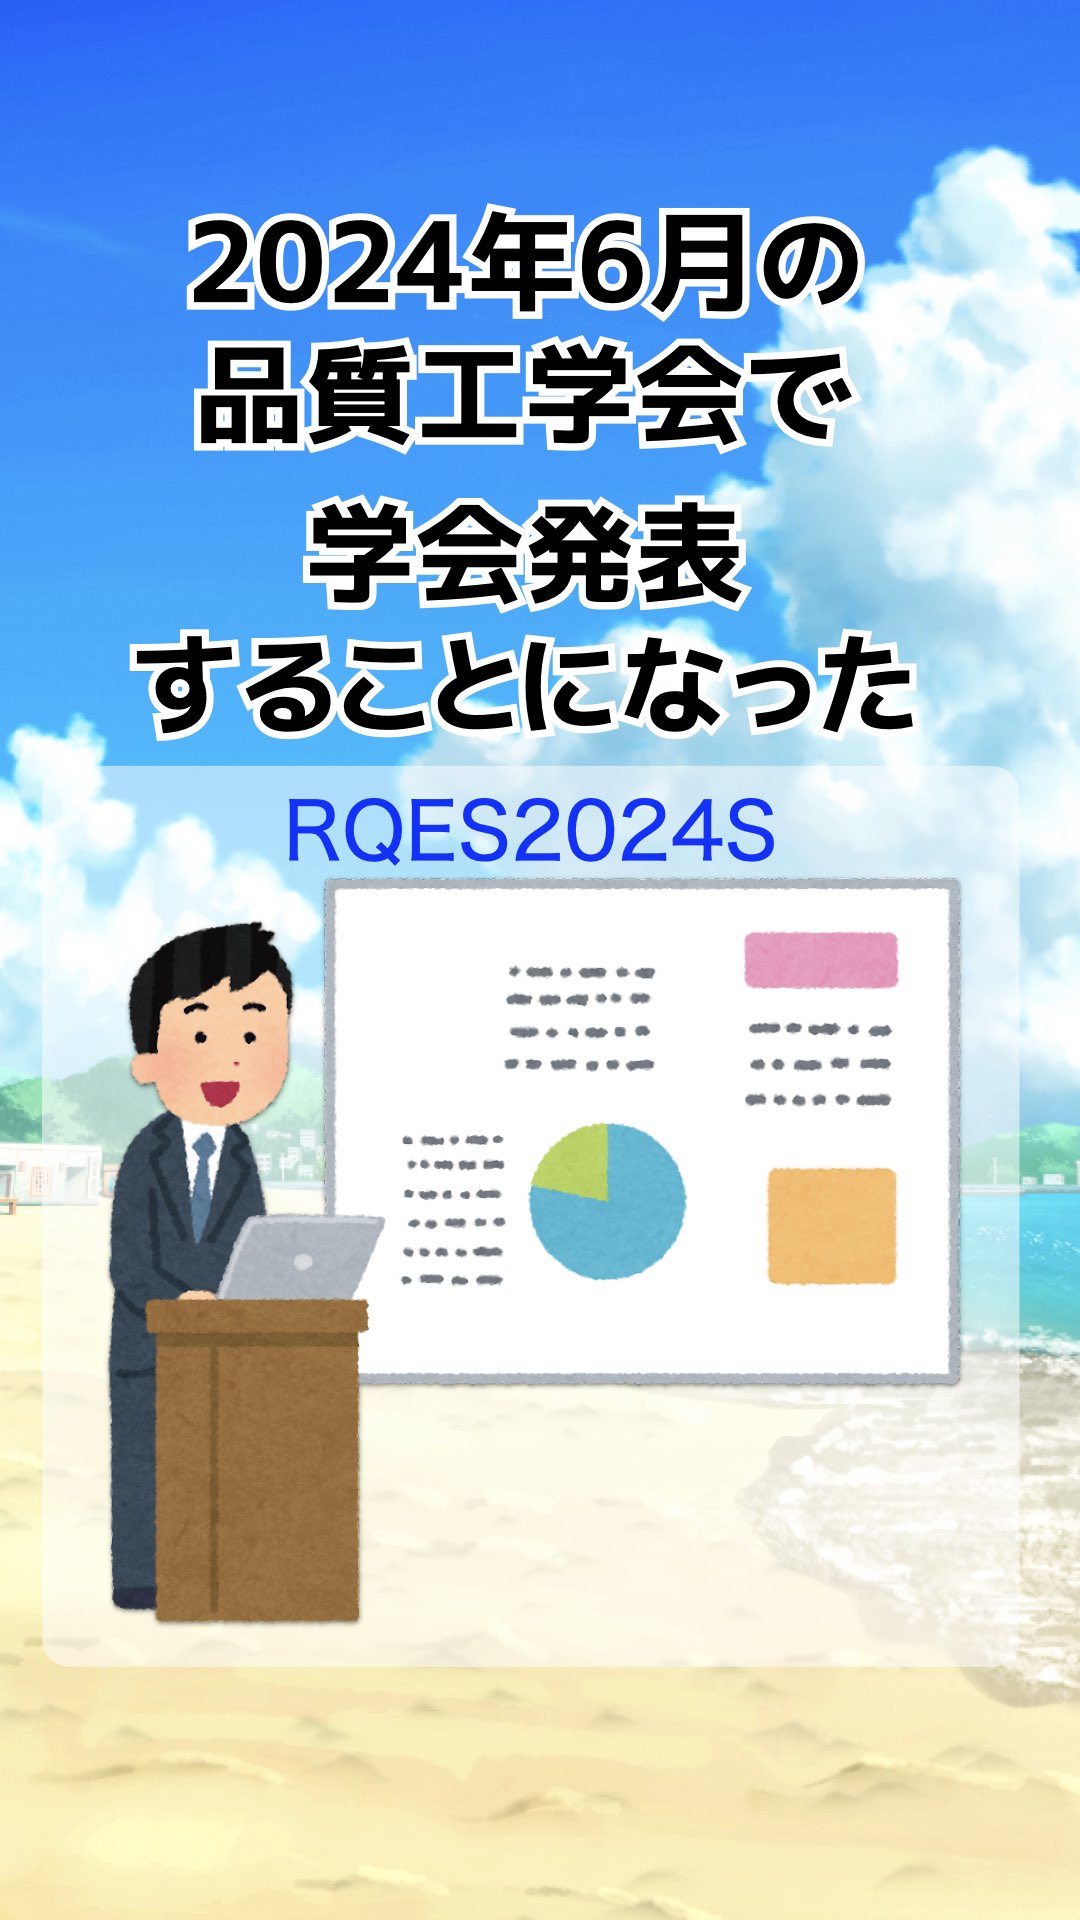 ‎RQES2024Snohappyou.‎001.jpeg